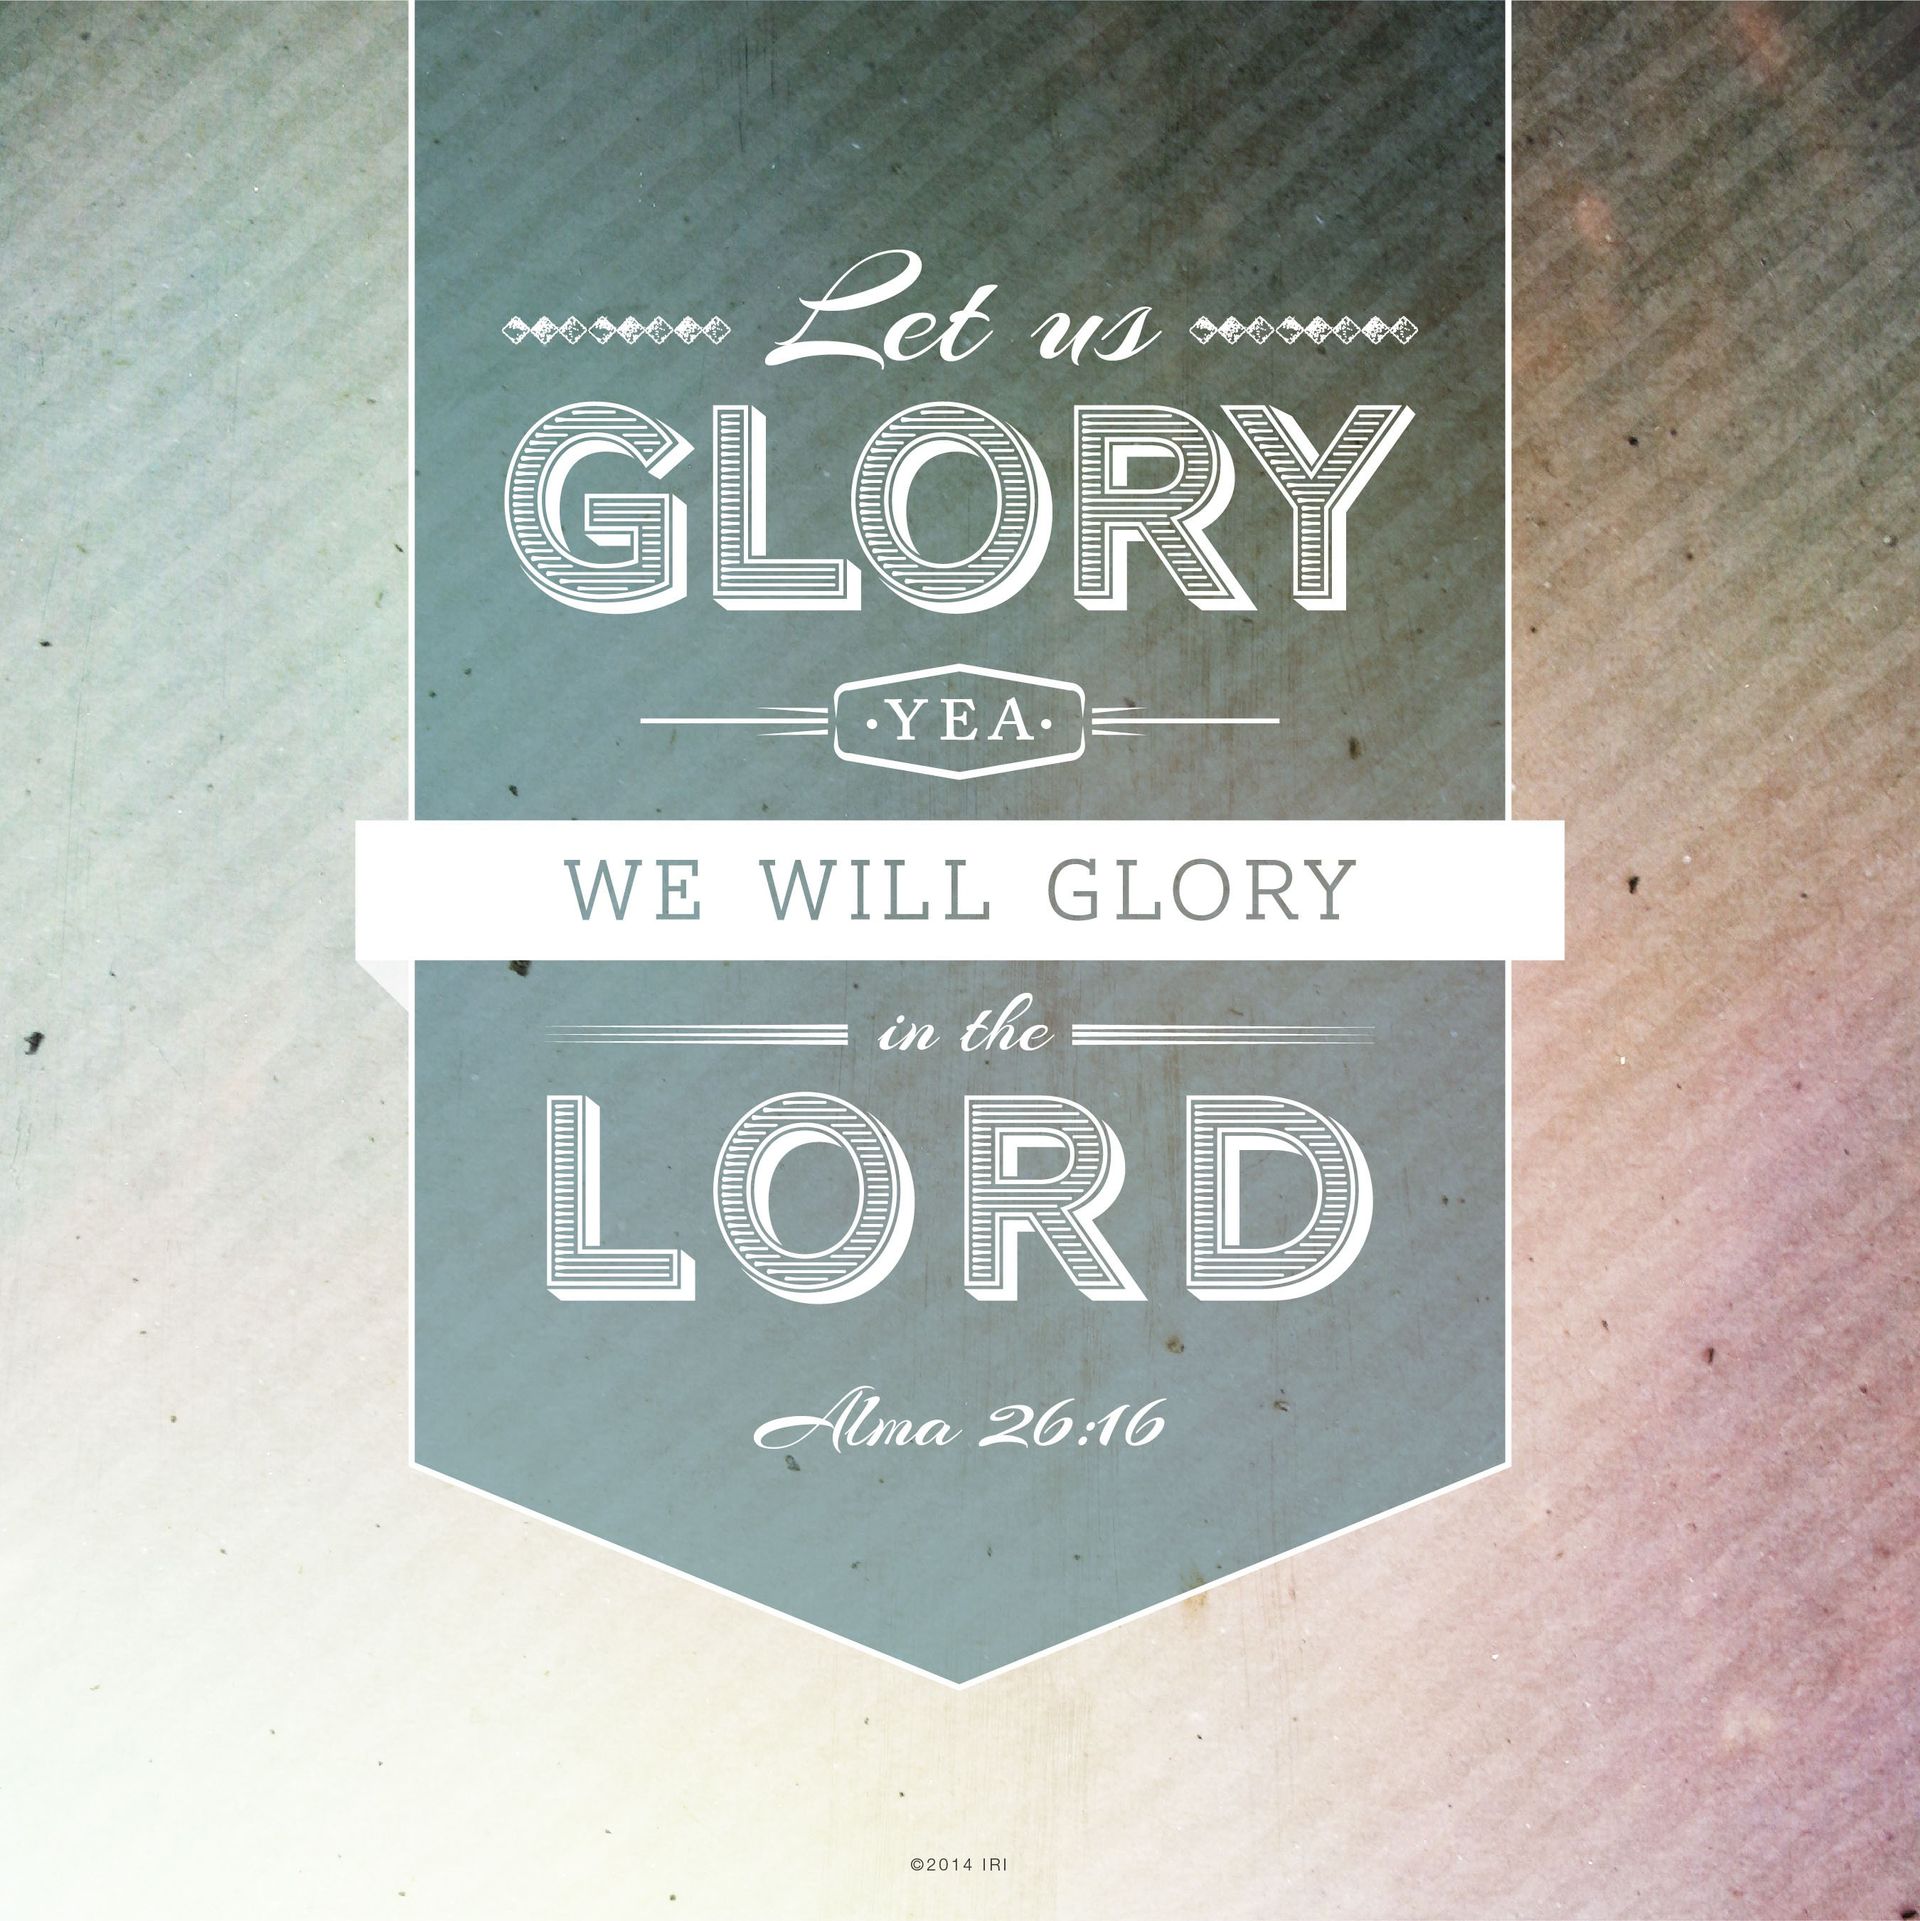 “Let us glory, yea, we will glory in the Lord.”—Alma 26:16 © undefined ipCode 1.